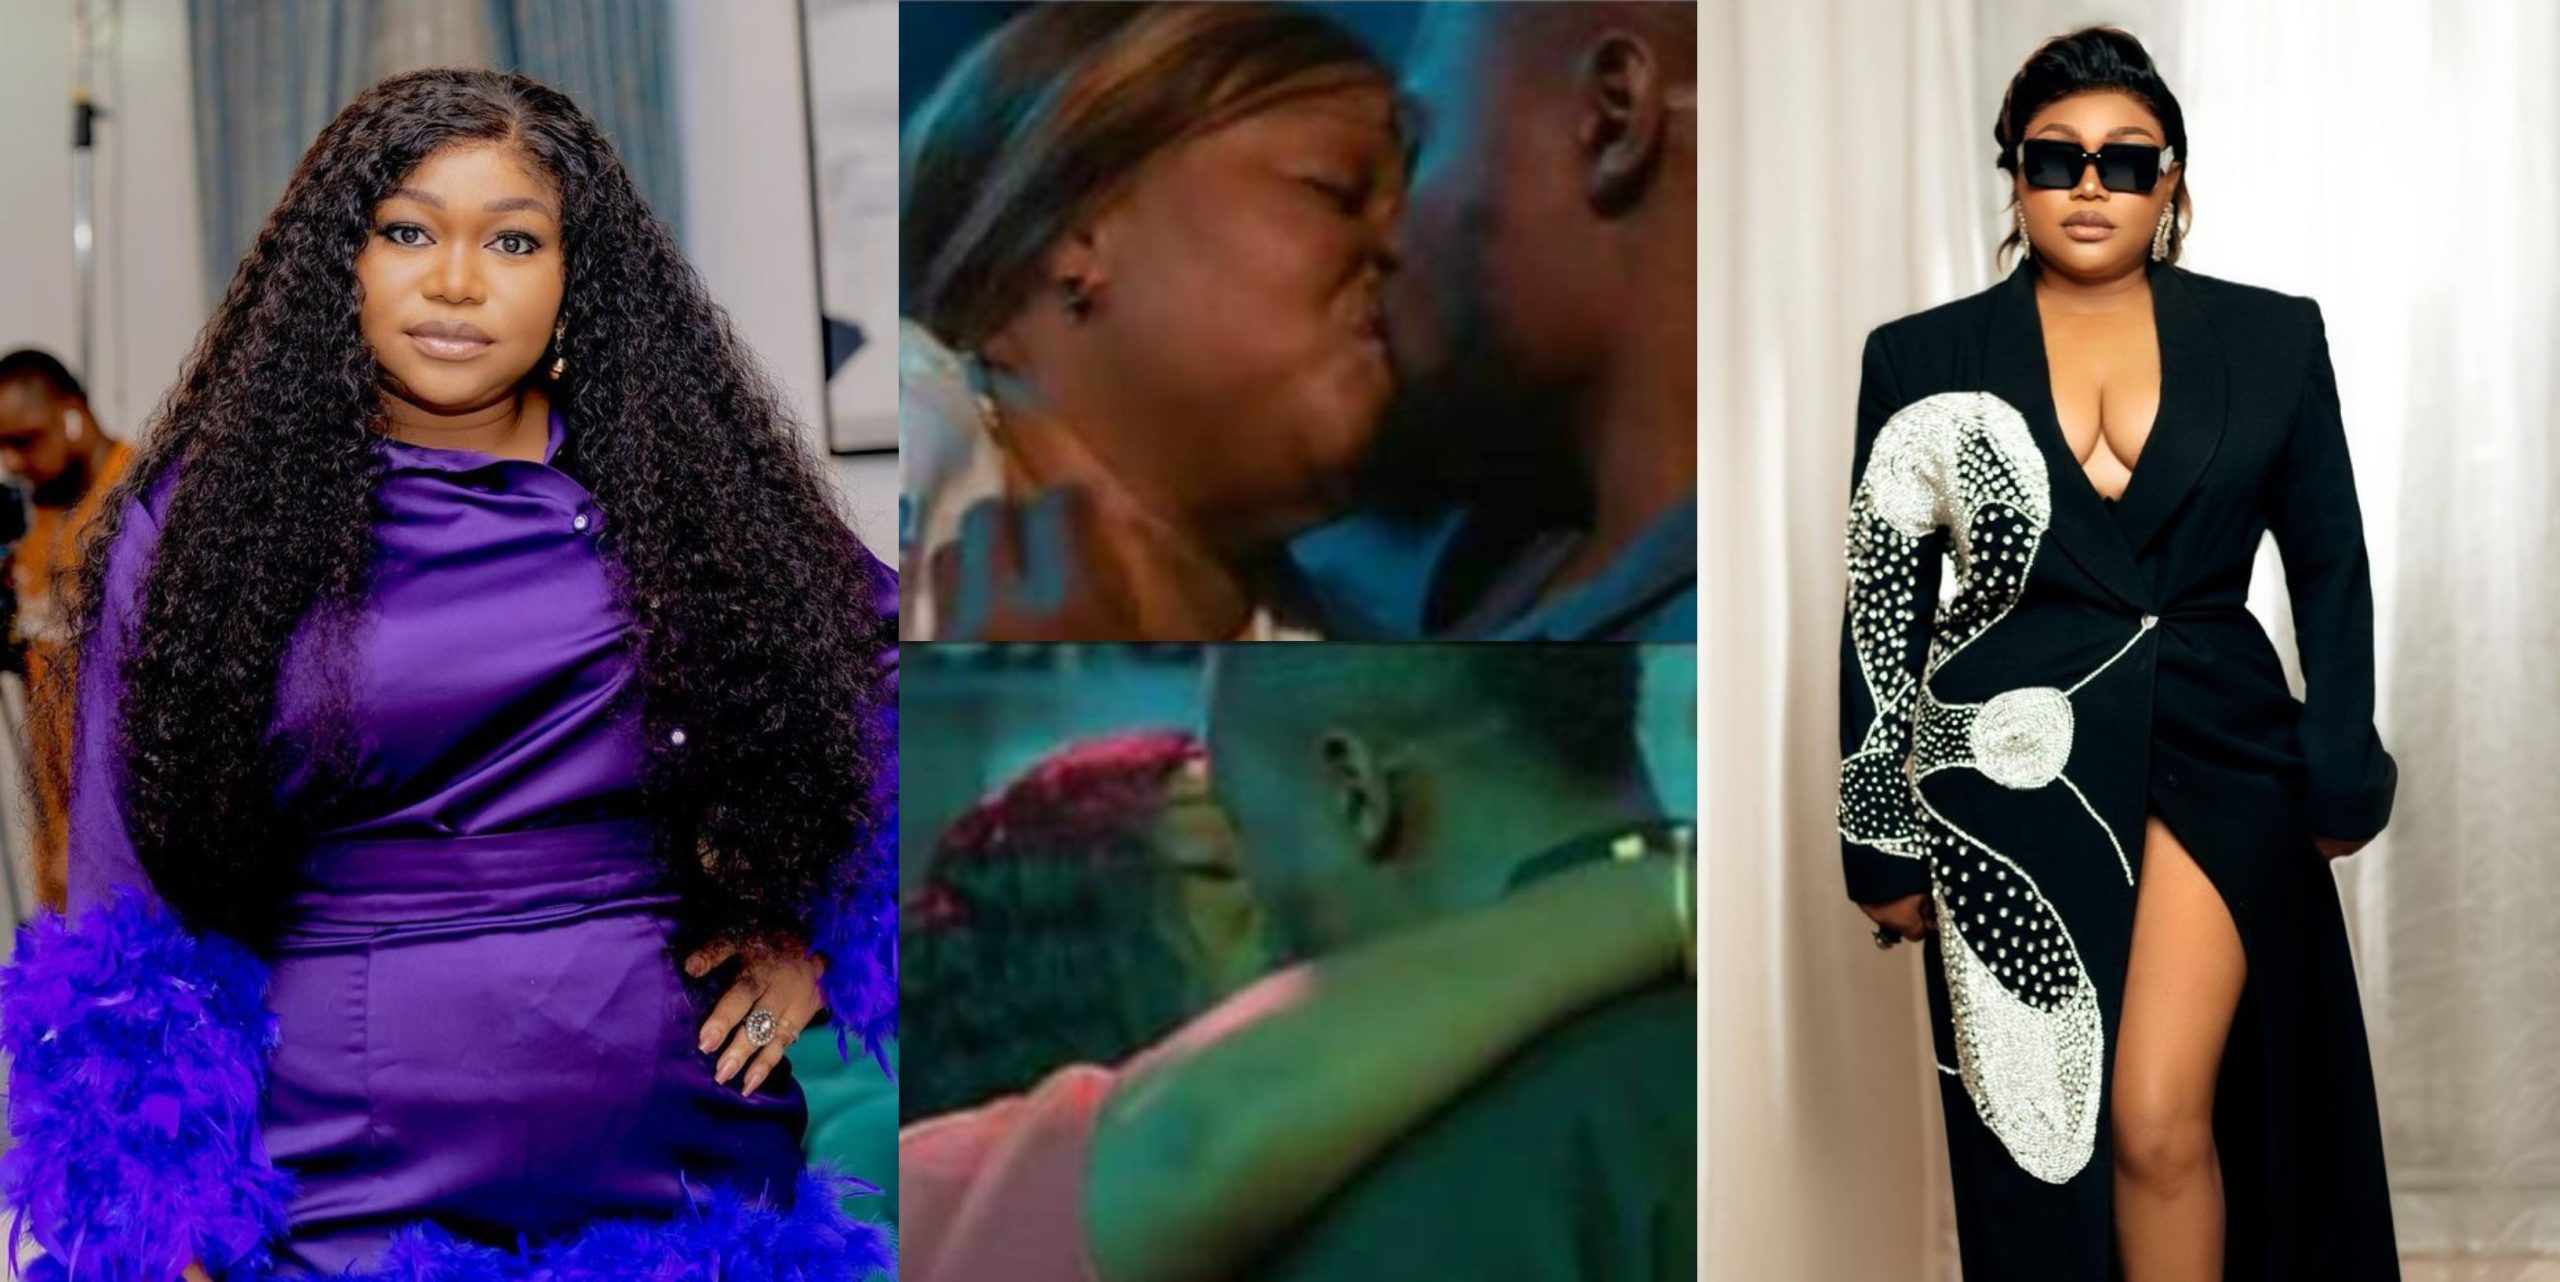 Actress Ruth Kadiri get dragged online for kissing in a movie after saying she would rather quit acting than kiss any man on set